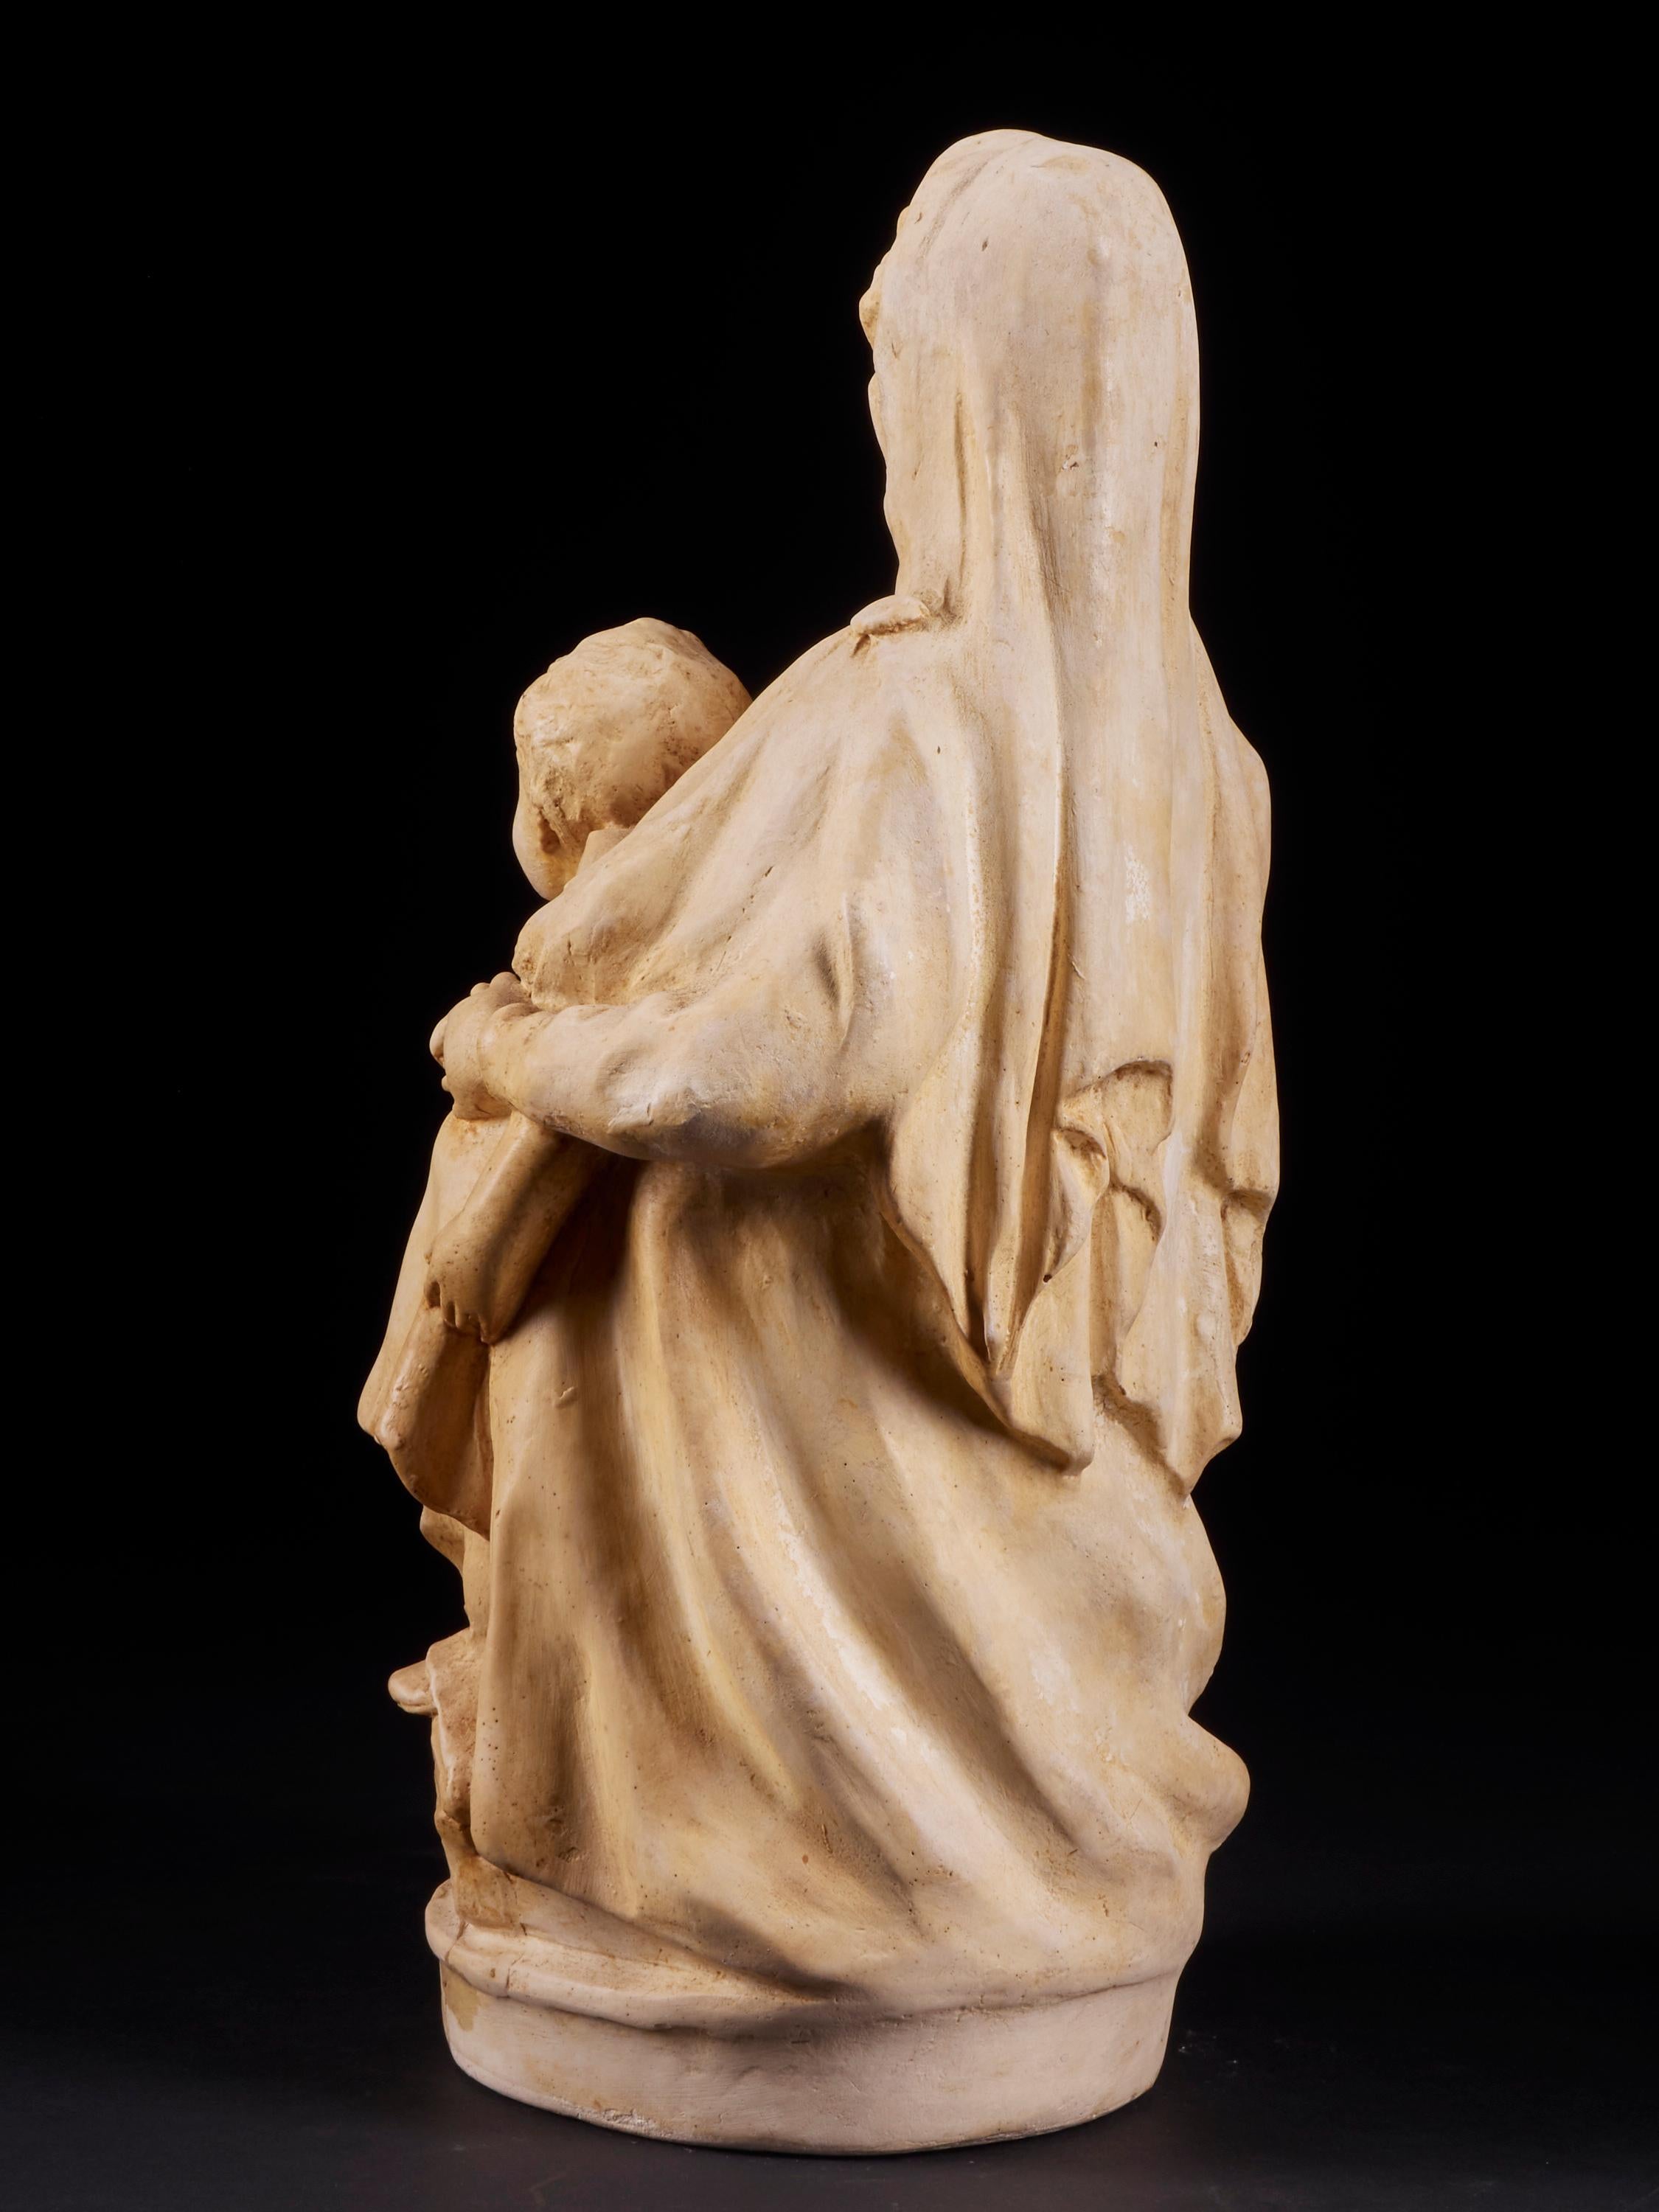 Hand-Crafted Mary and Child Plaster Statue Signed and Marked Algget, Devliegher from Bruges